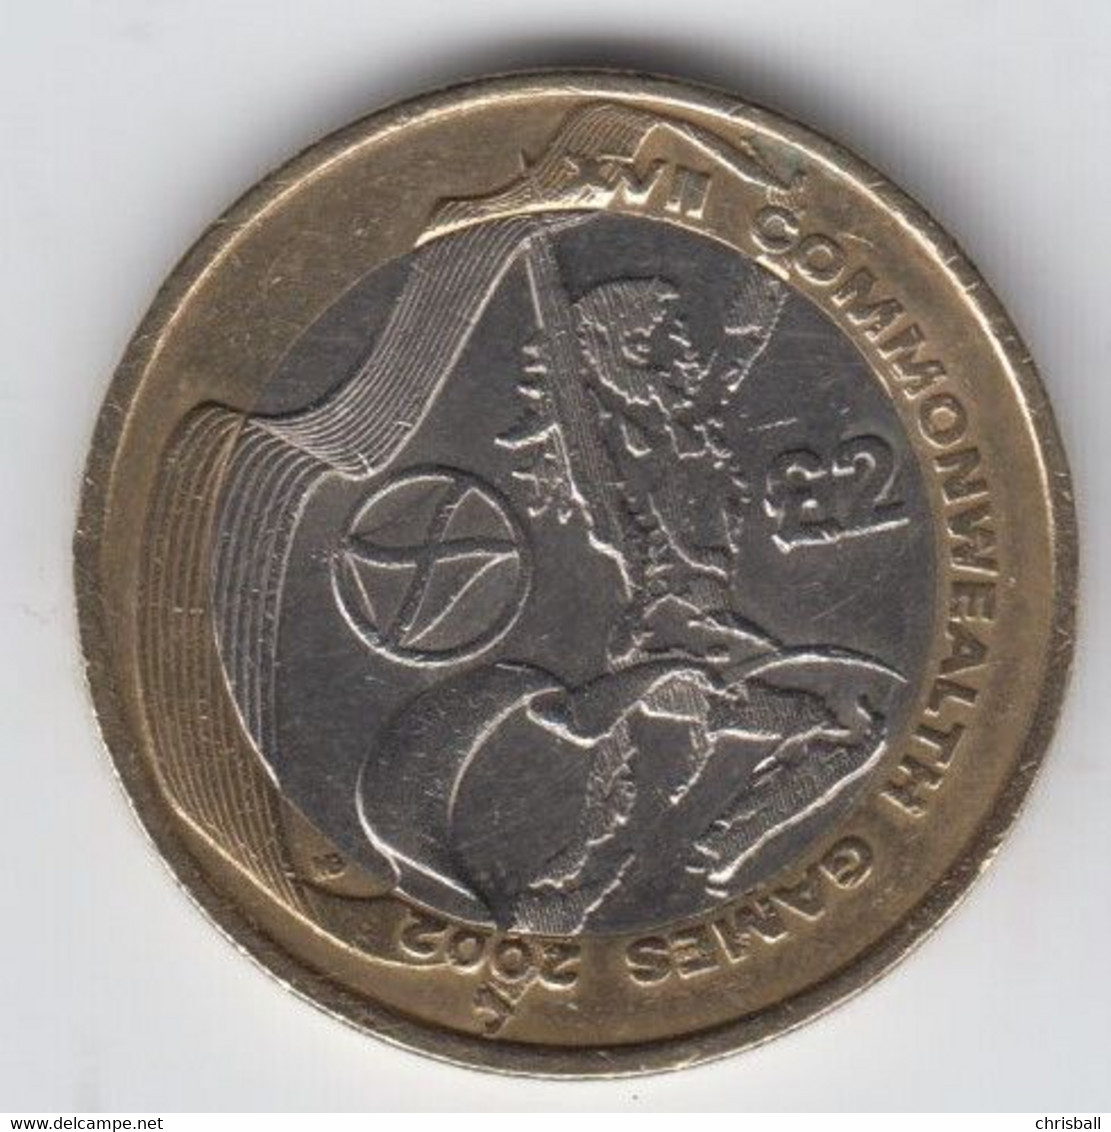 Great Britain UK £2 Two Pound Coin (CWG - Scotland) - Circulated - 2 Pounds